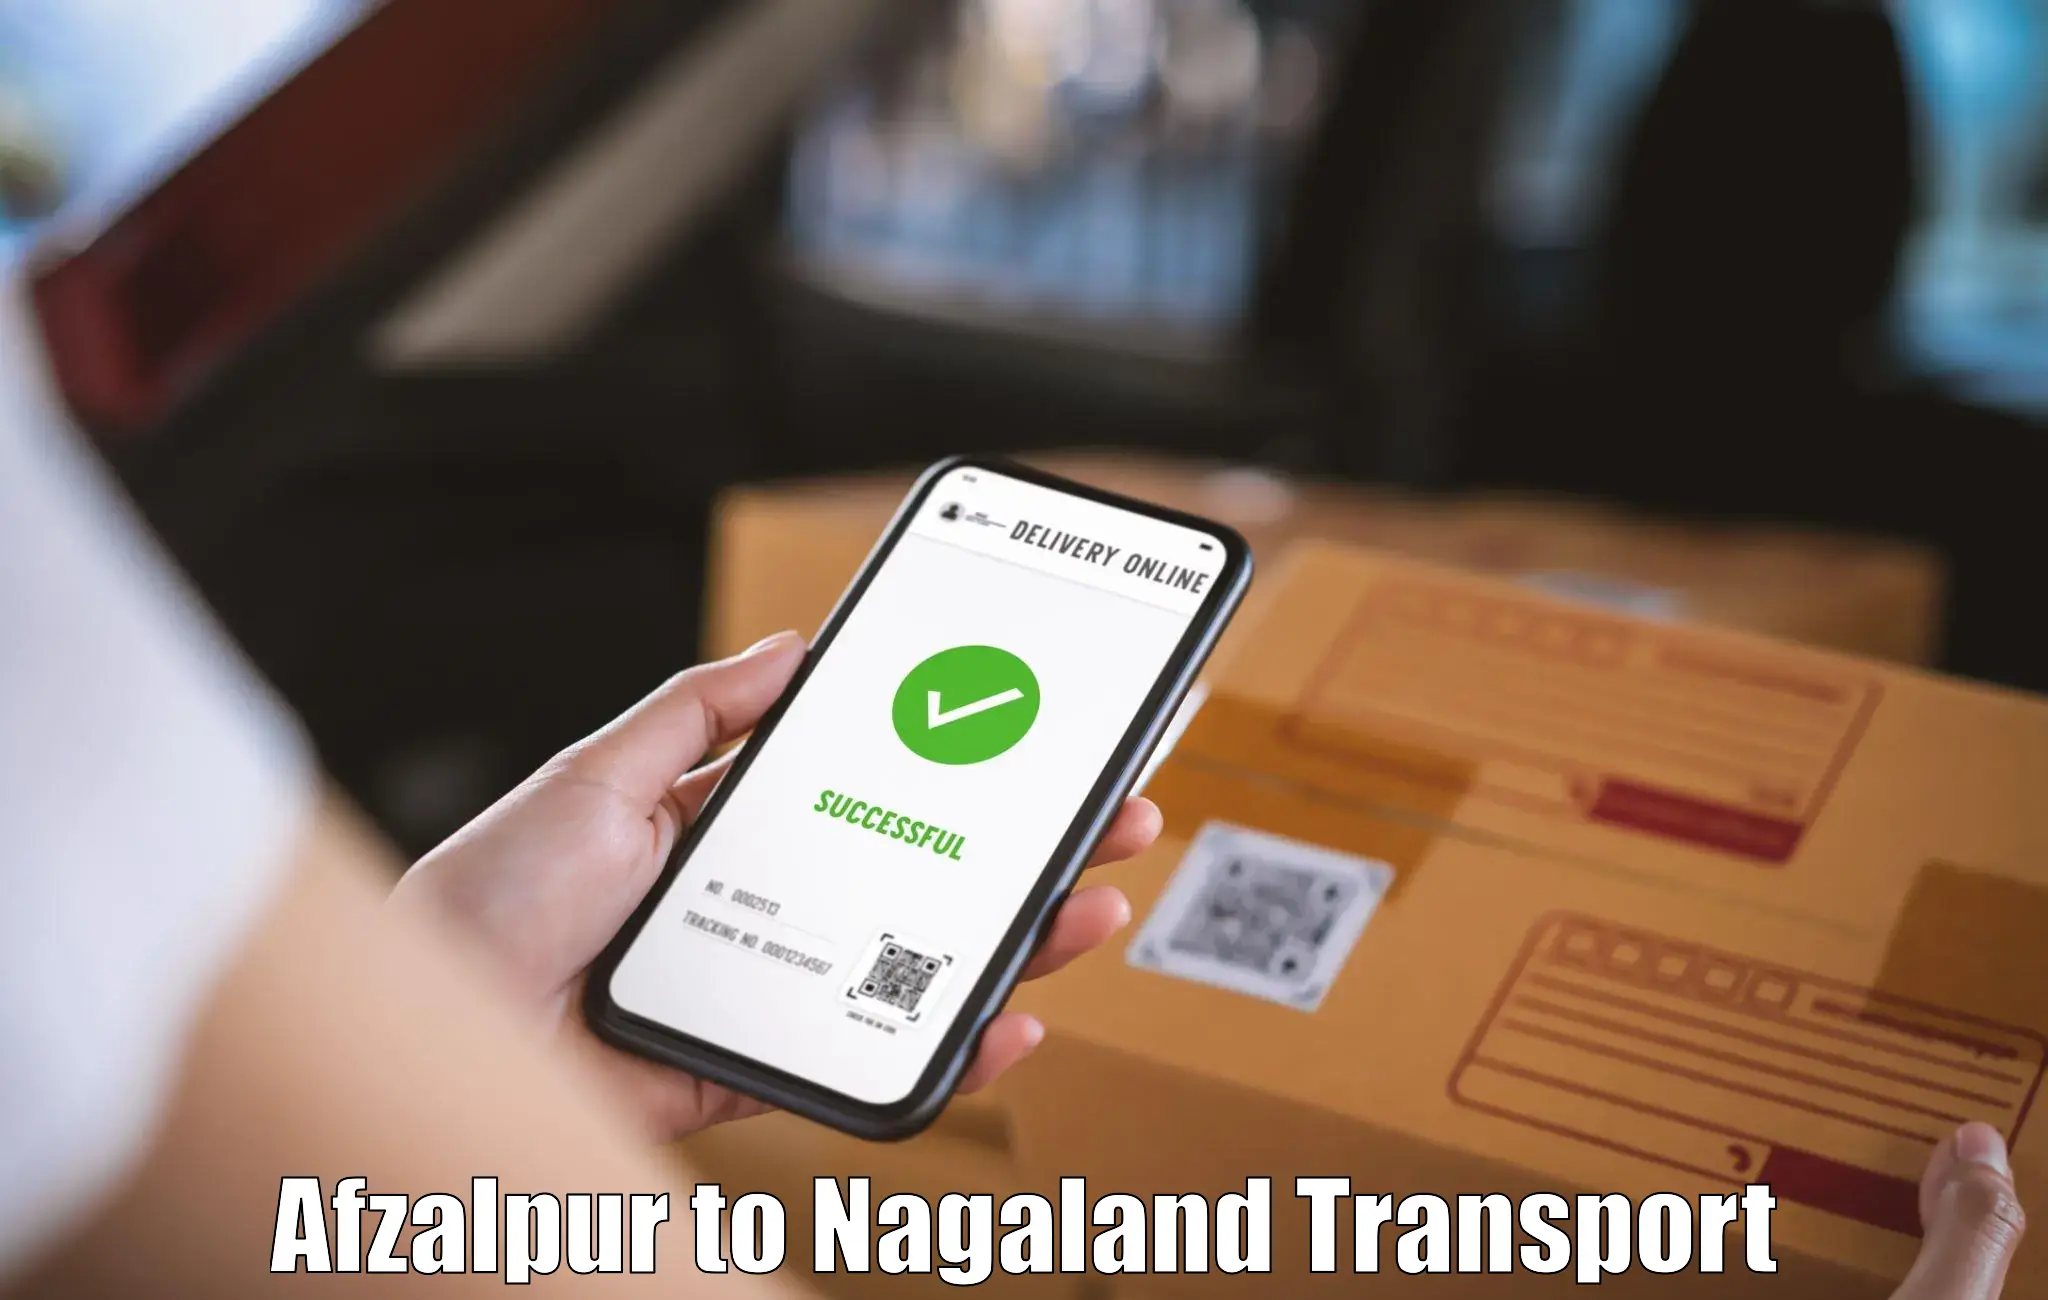 Container transport service in Afzalpur to Nagaland